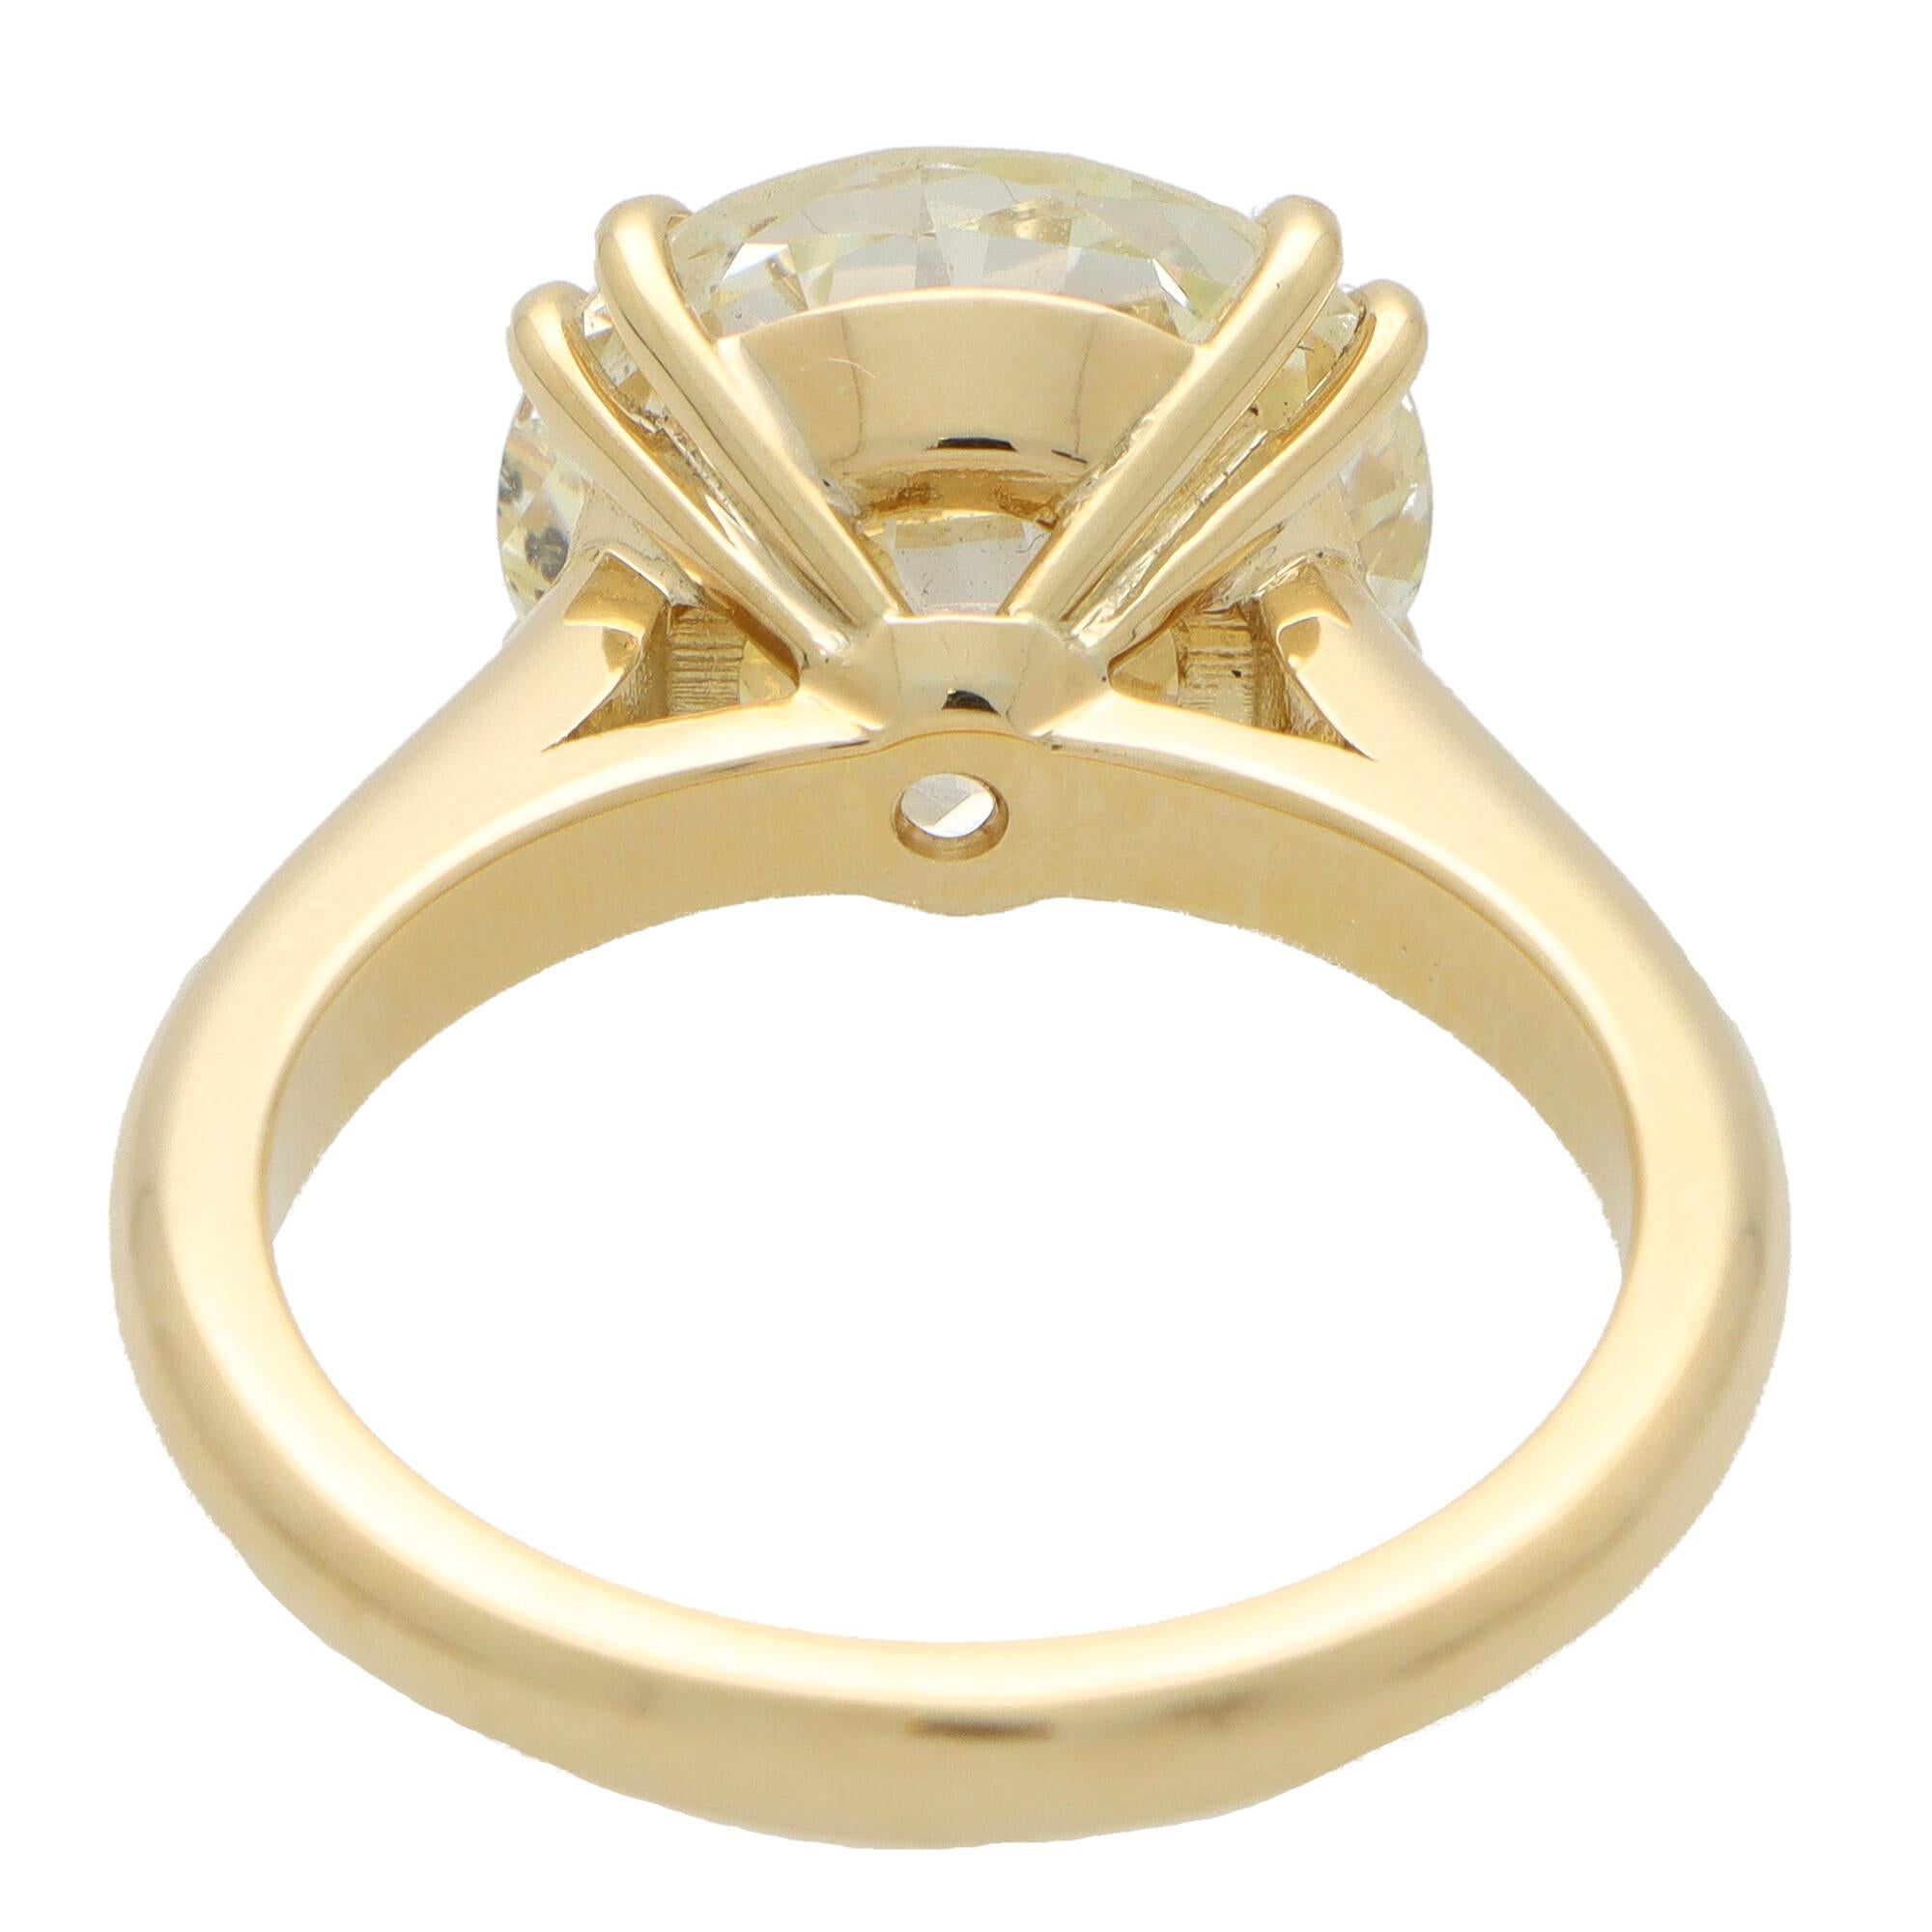 Certified 7.01 Carat Old Cut Diamond Solitaire Ring in Yellow Gold For Sale 3